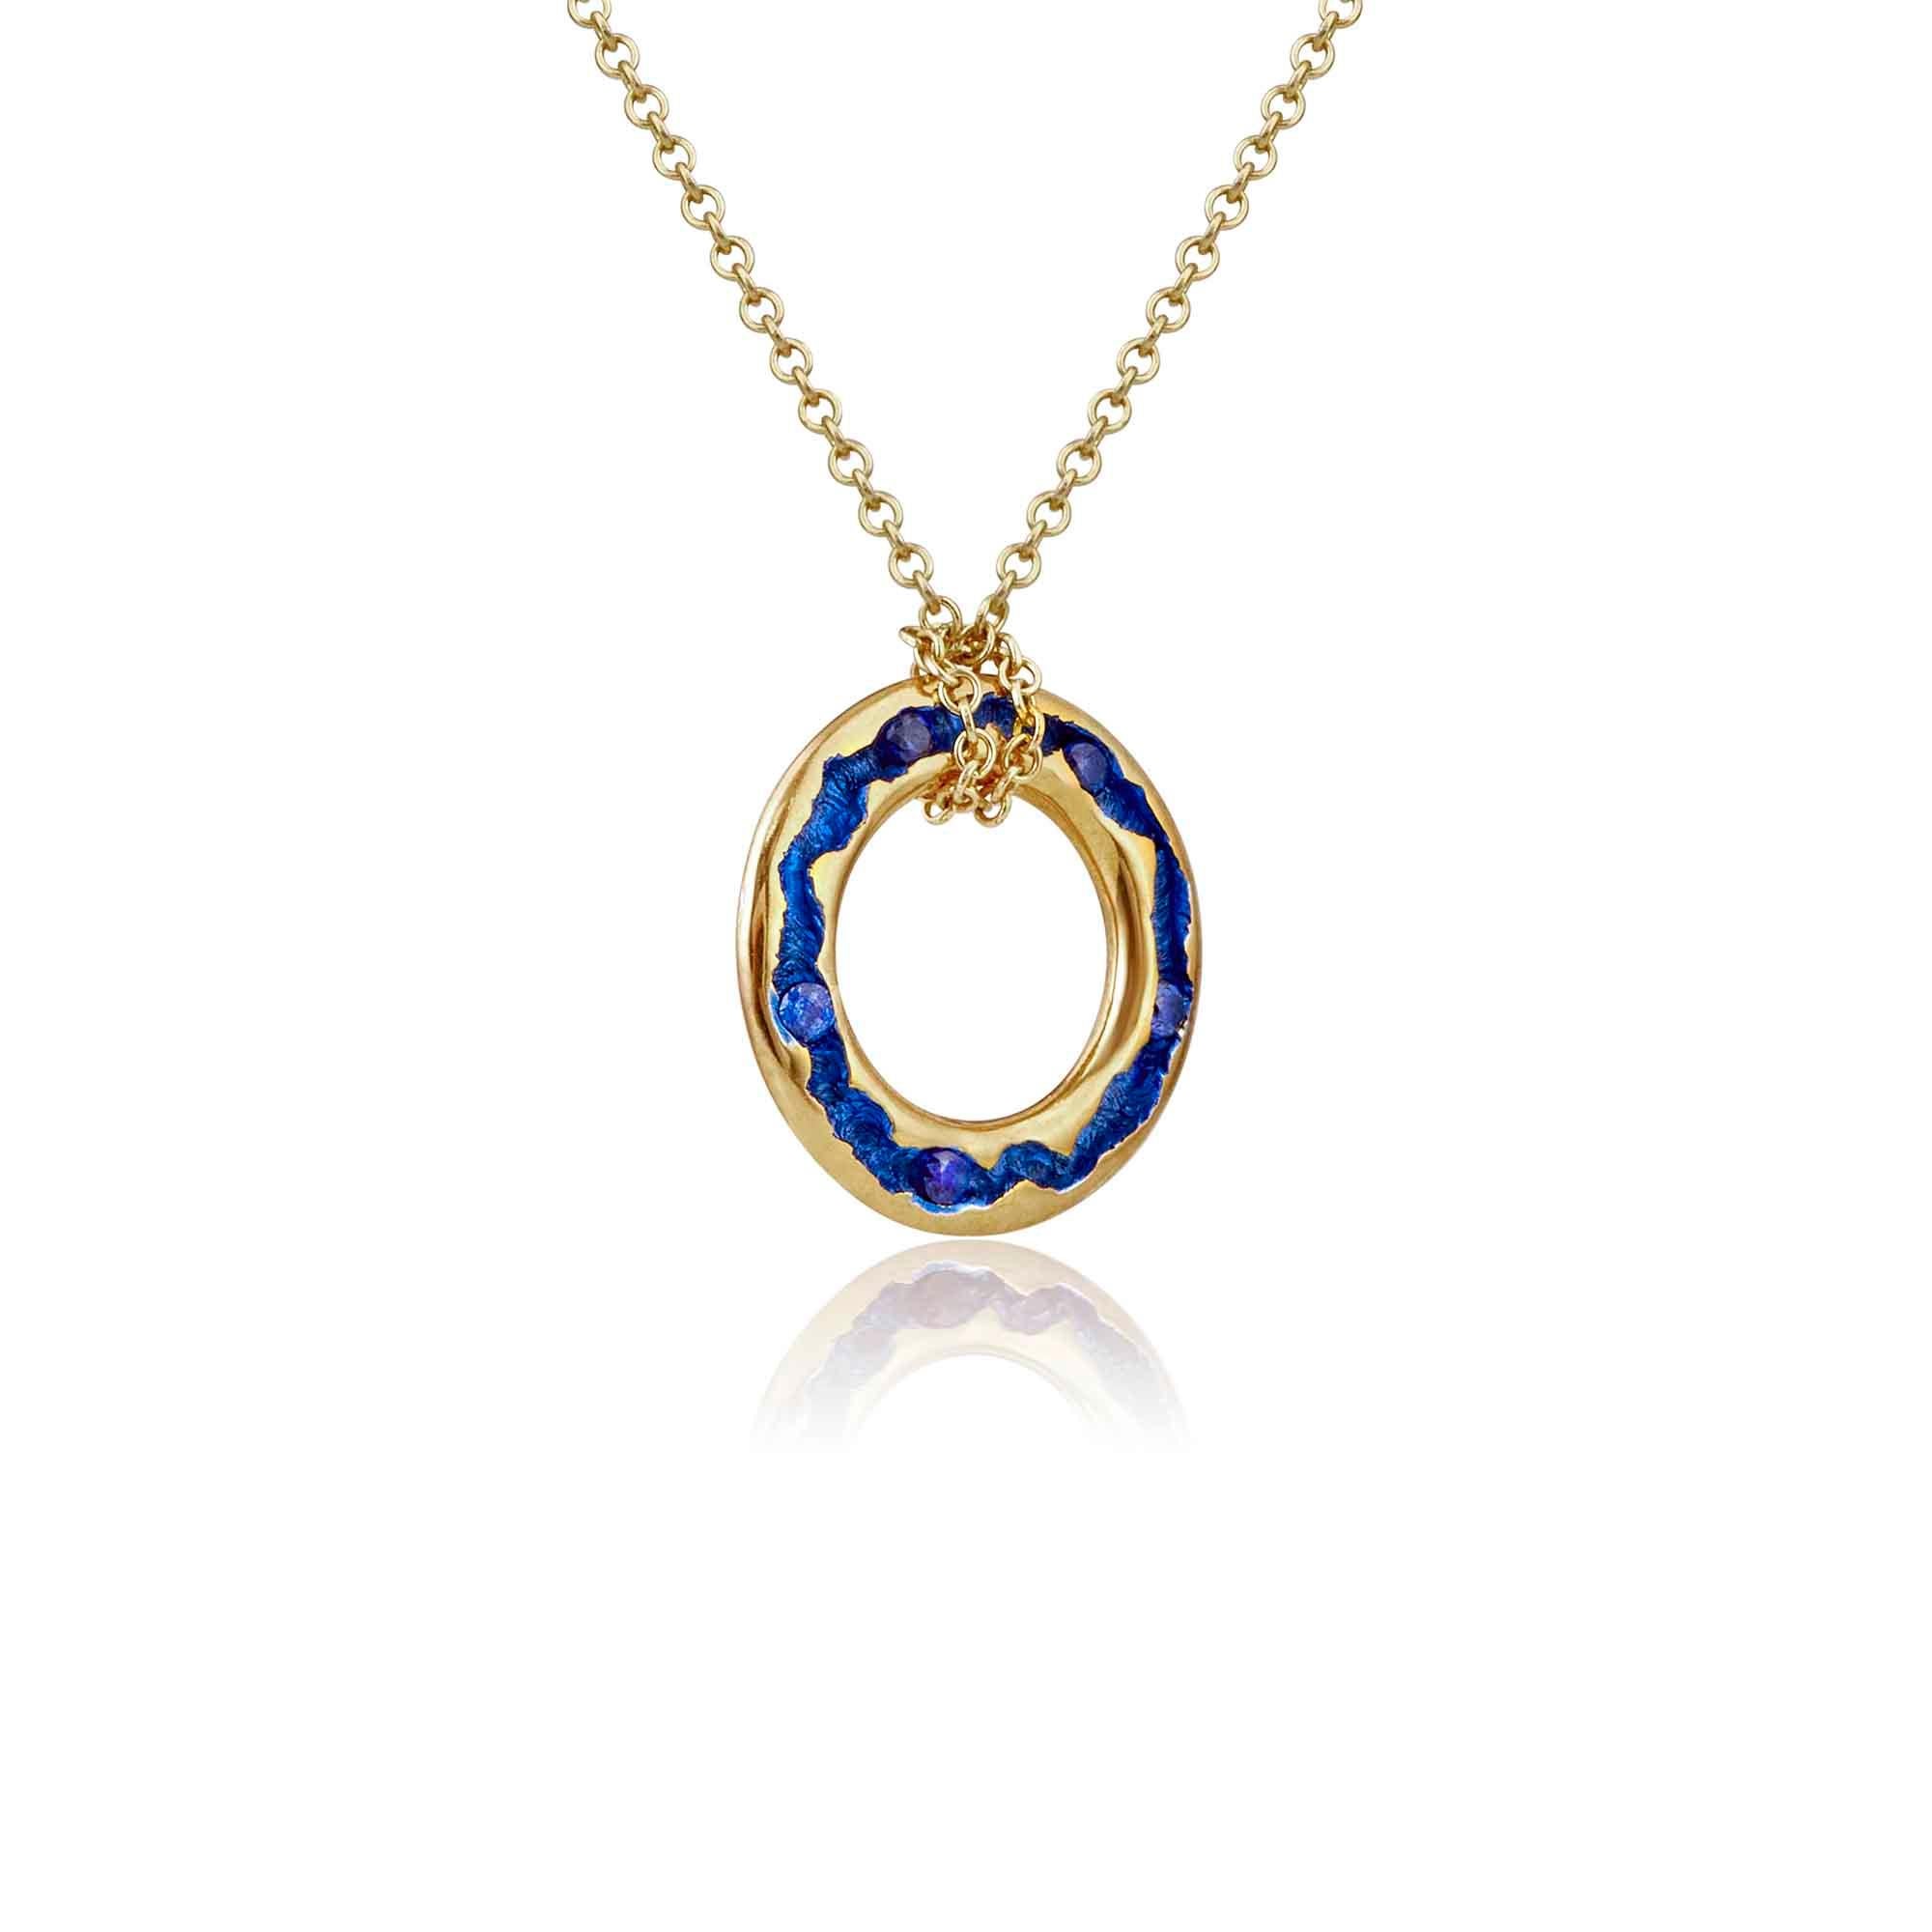 Prepare to be dazzled by the radiant burst of color that awaits you! Imagine an electric blue necklace that will instantly elevate your day to new heights of excitement. This remarkable piece of artistry possesses the power to brighten even the